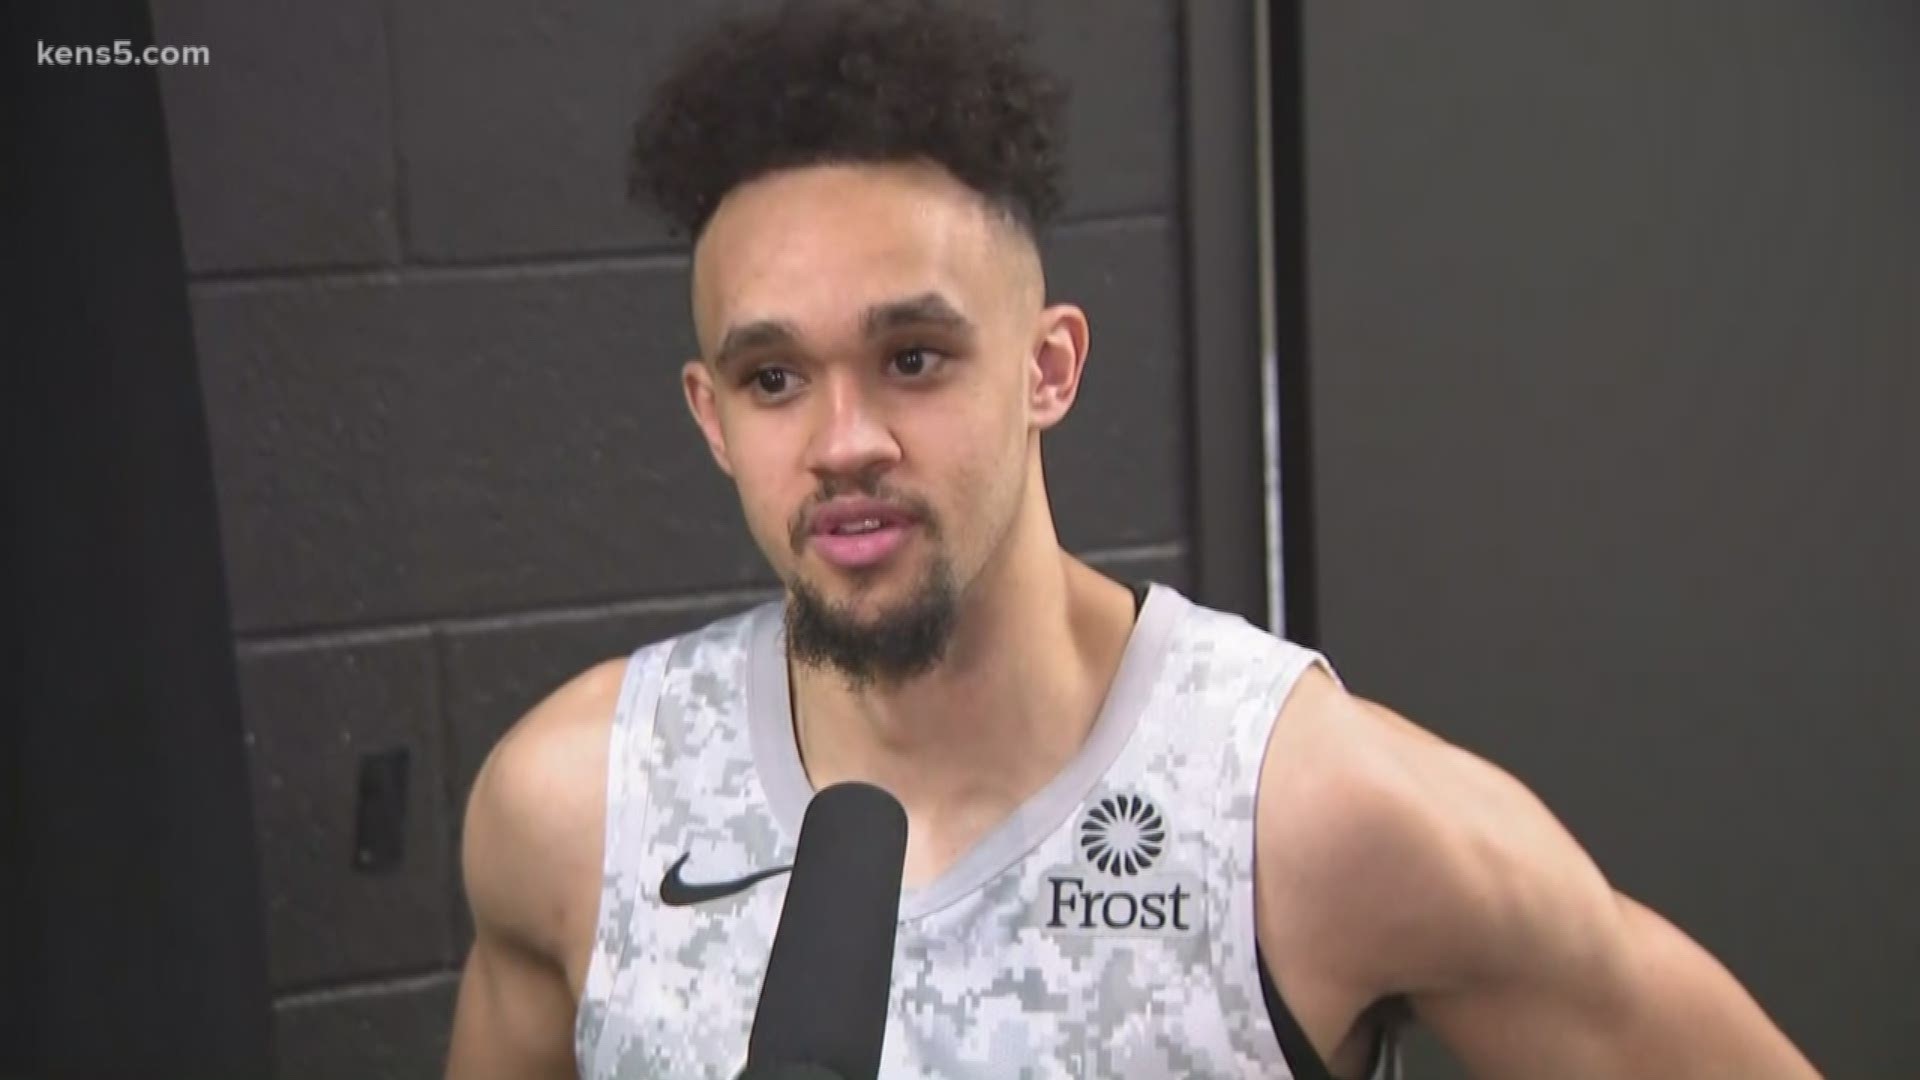 Several Spurs scored in double-digits in the win, and Derrick White continues his recent scoring spurt